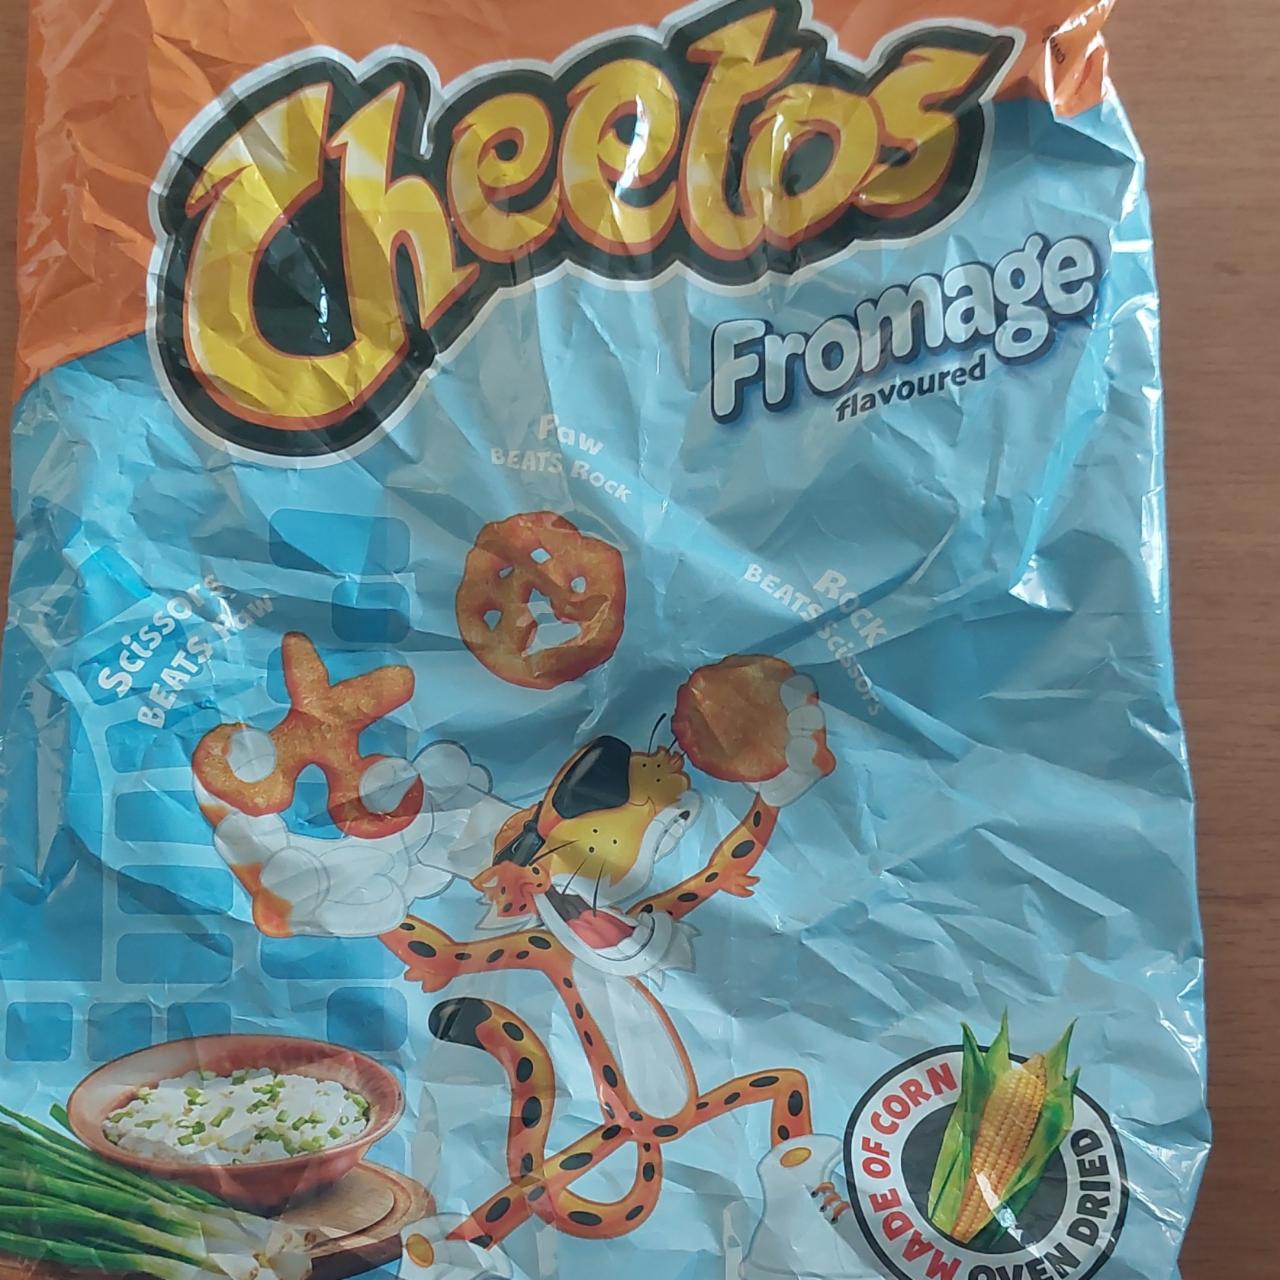 Fotografie - Rock Paw Scissors Fromage flavoured Cheetos